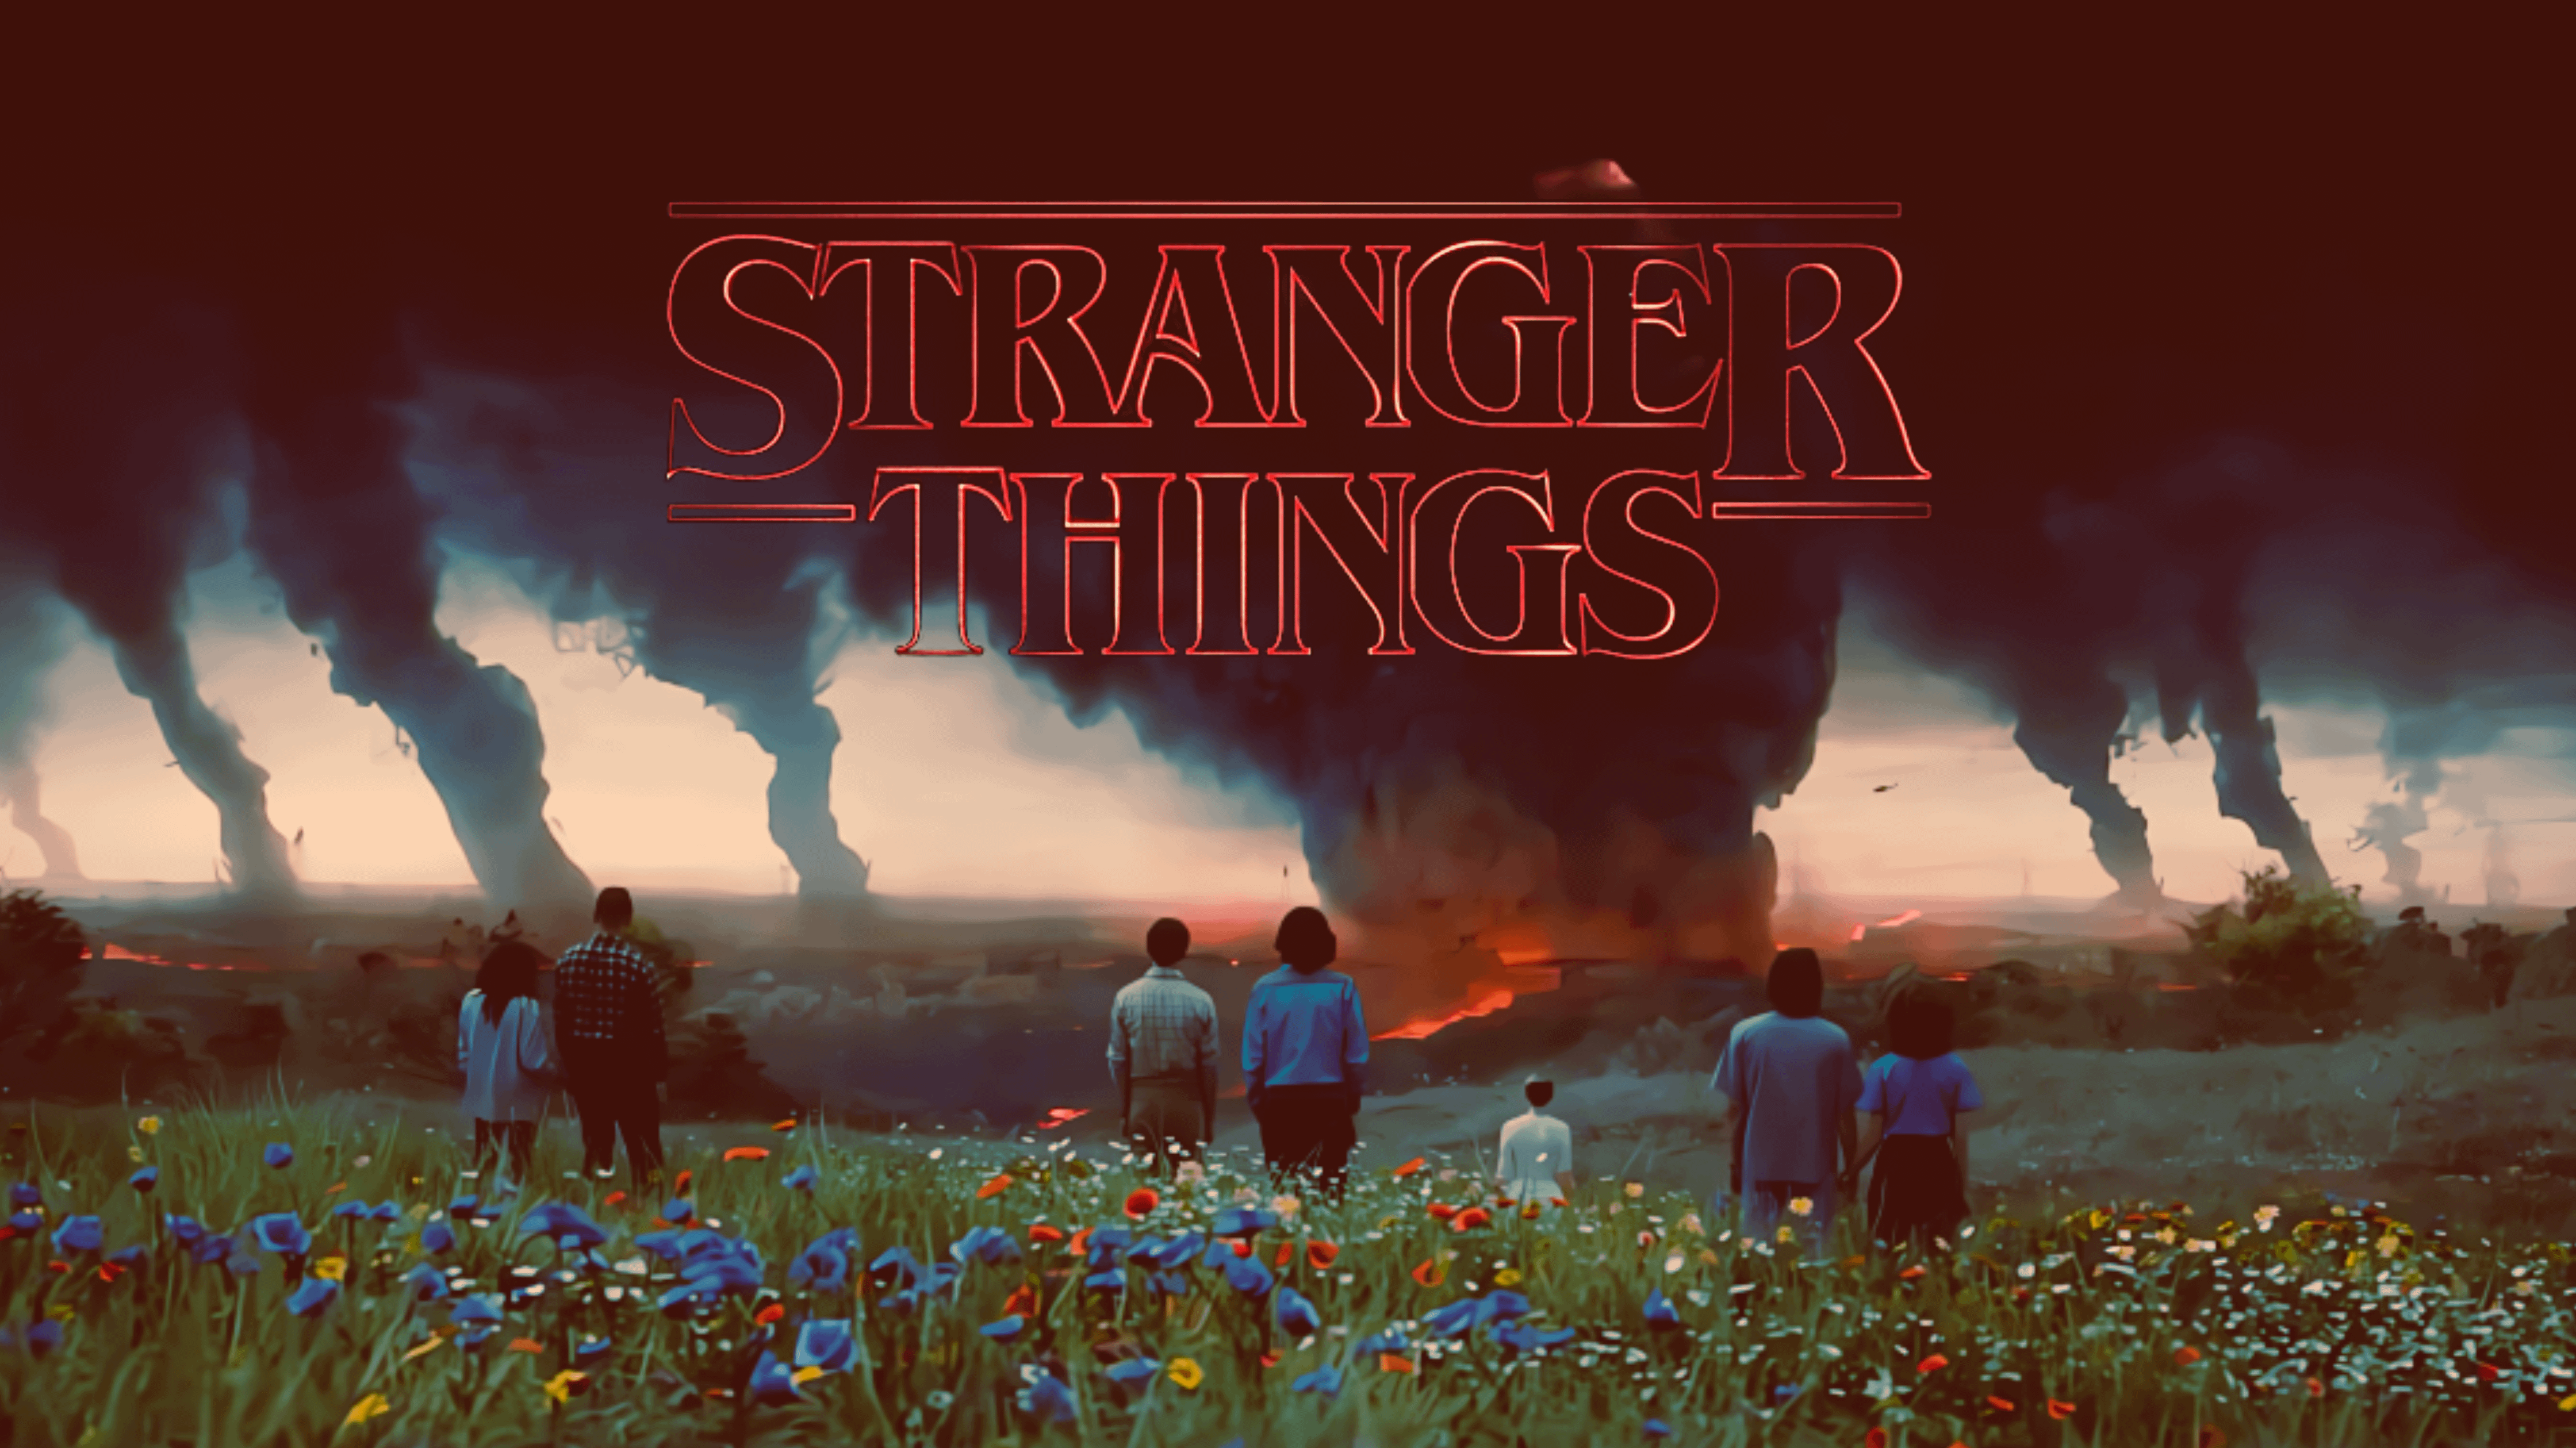 Stranger Things Wallpaper With My Favorite Shot From The Series So